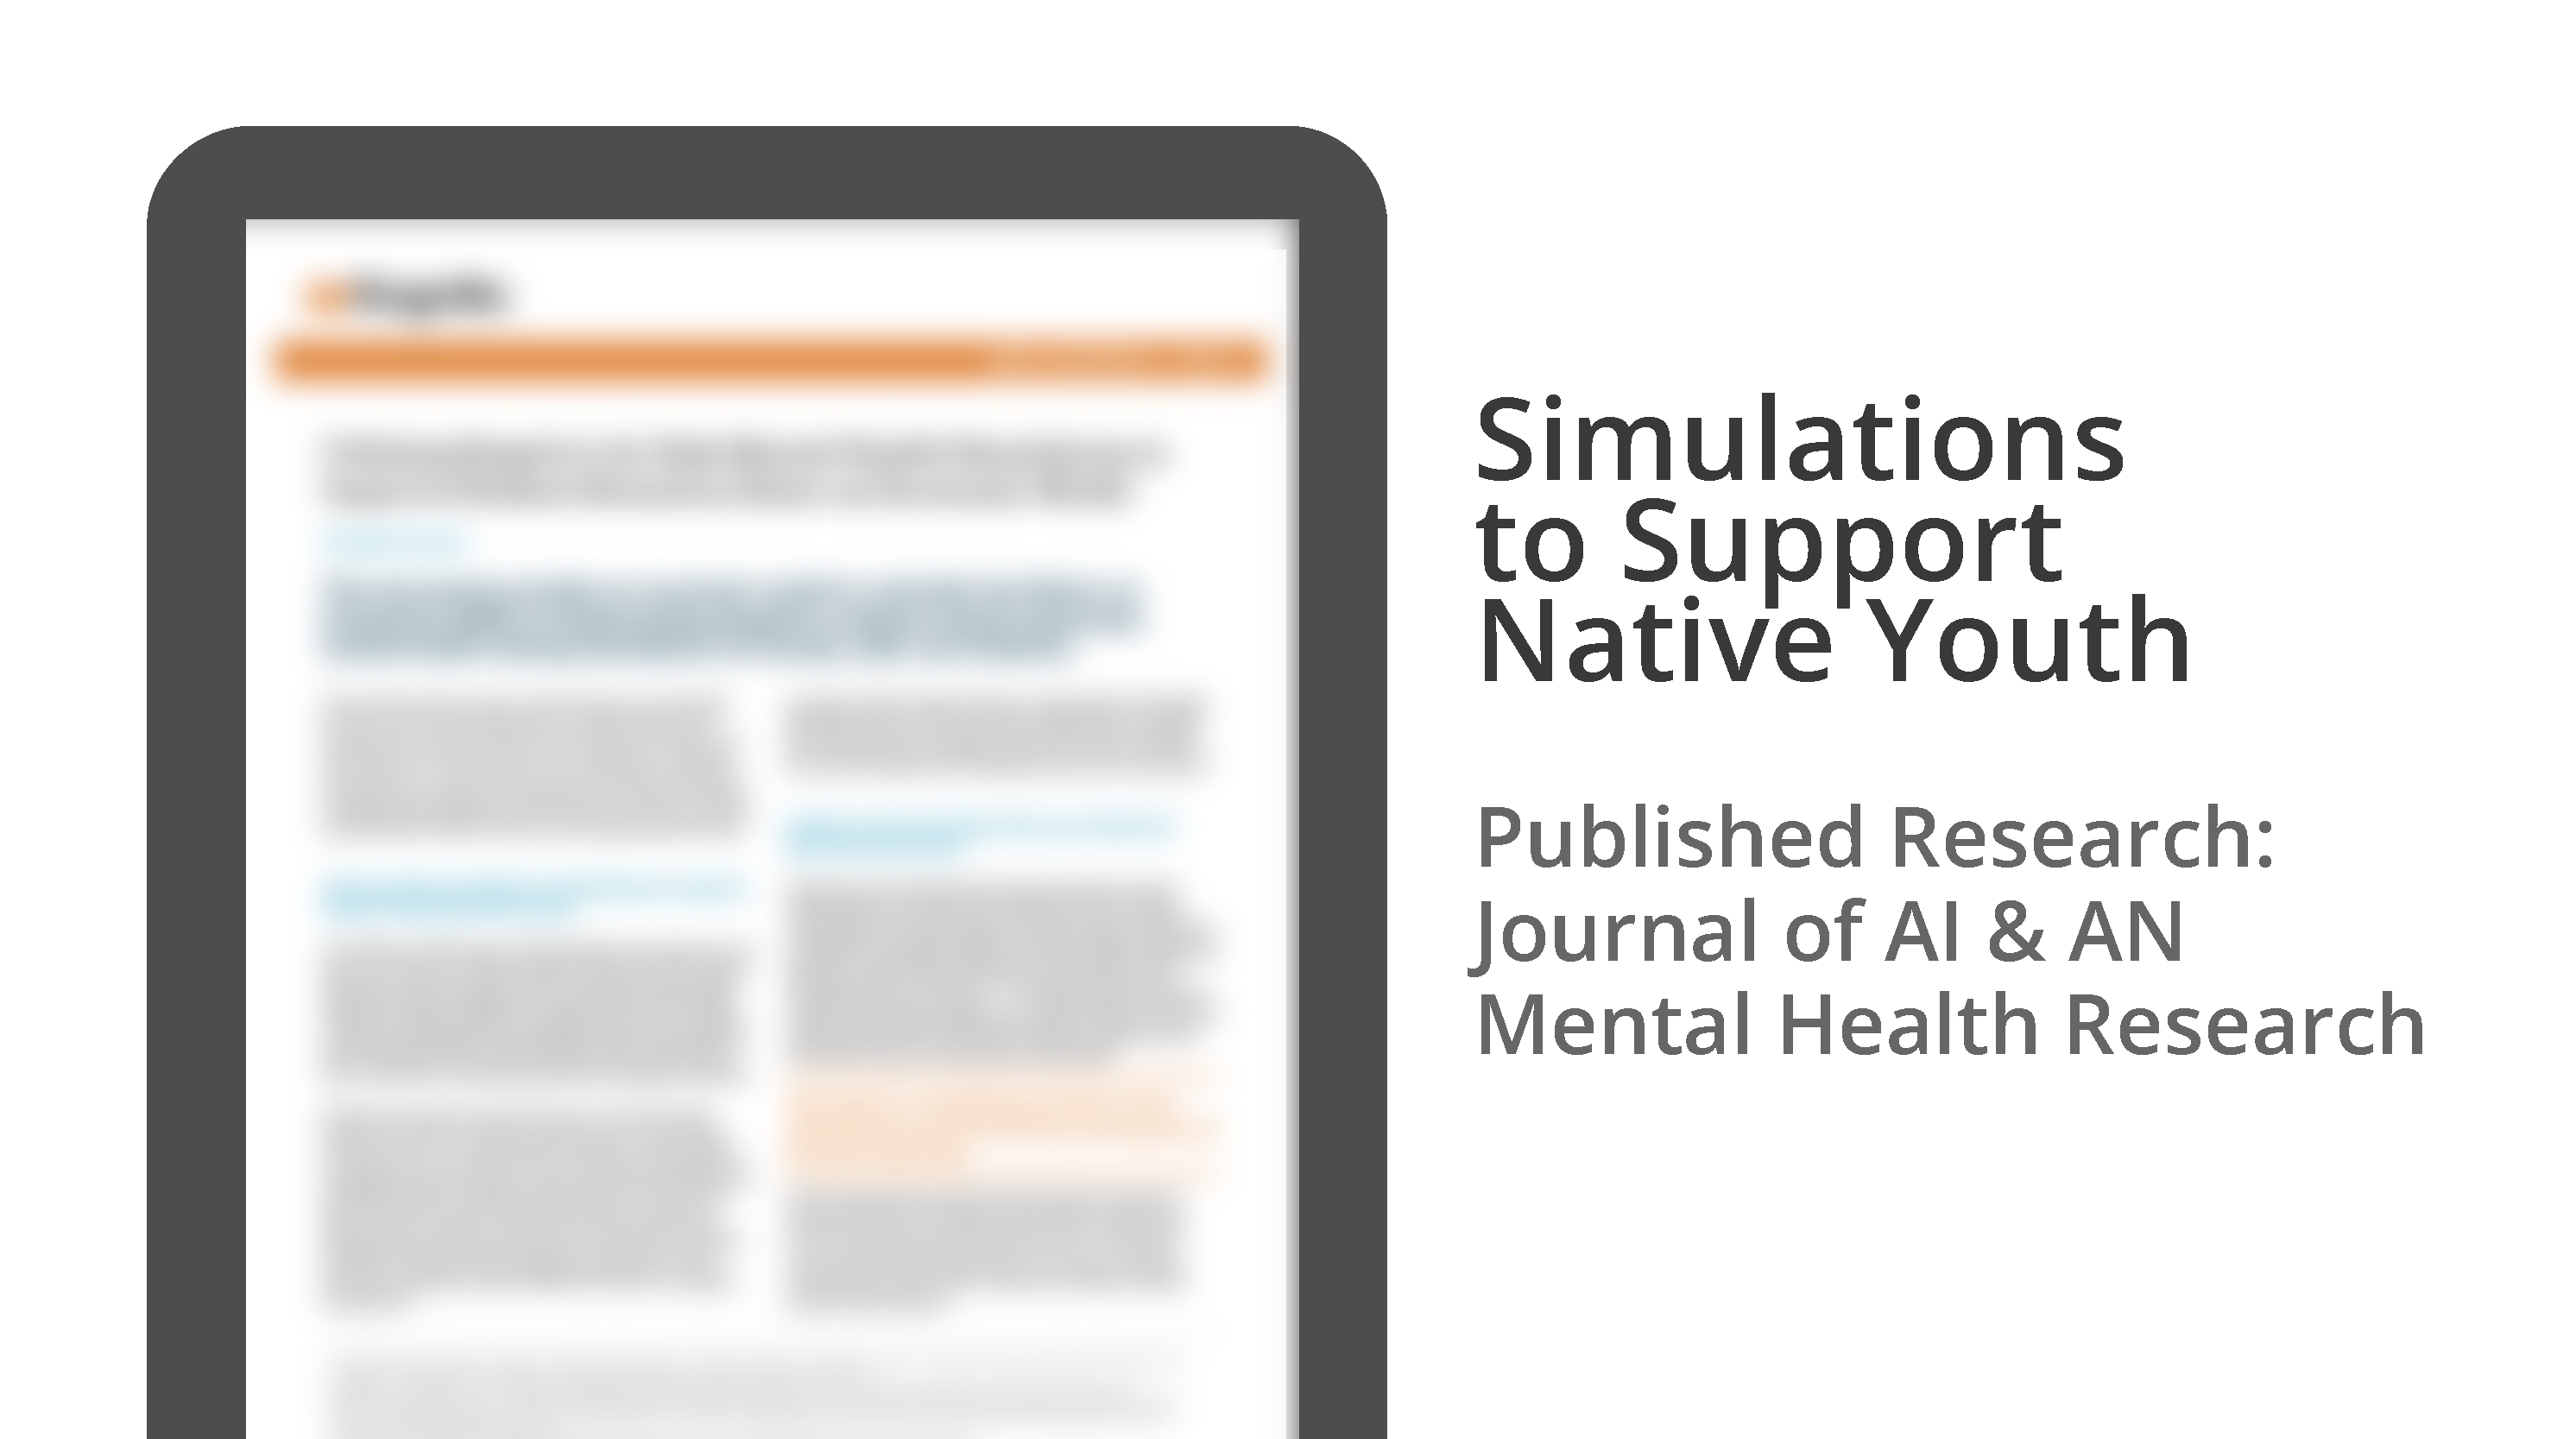 Simulations to Support Native Youth